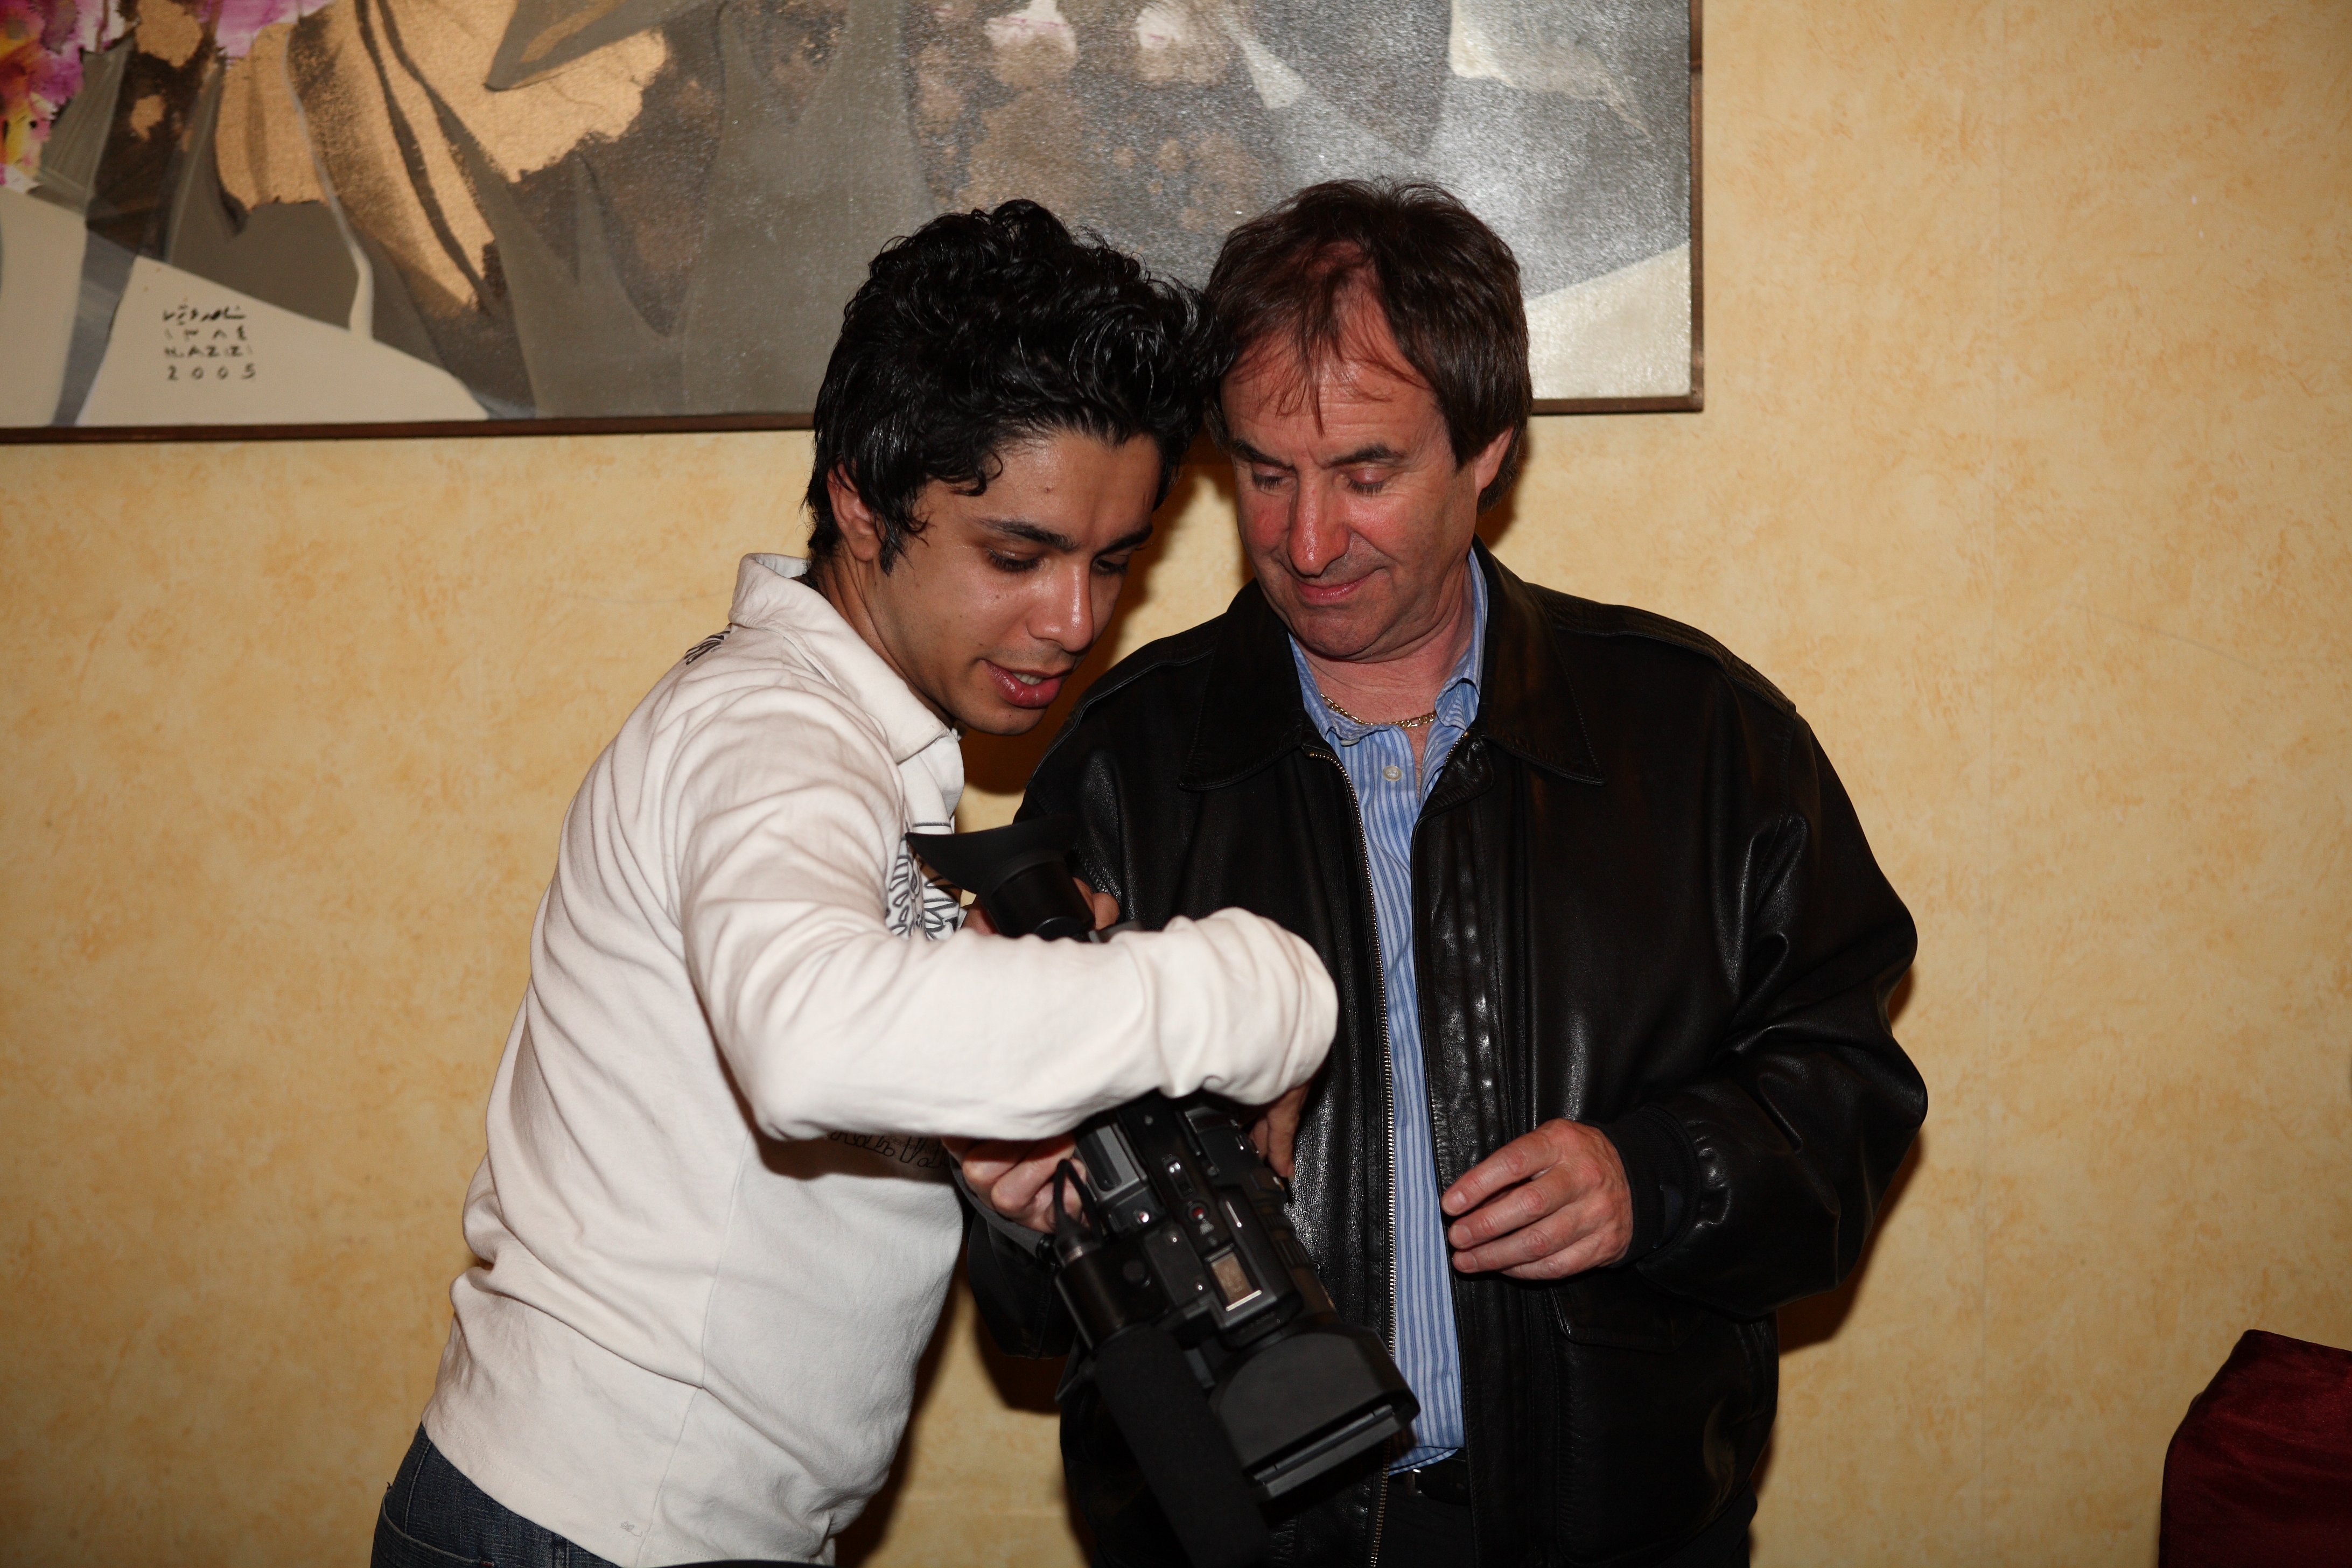 arash bahmani teaches to chris de burgh to how camera works during making a documentary film for him